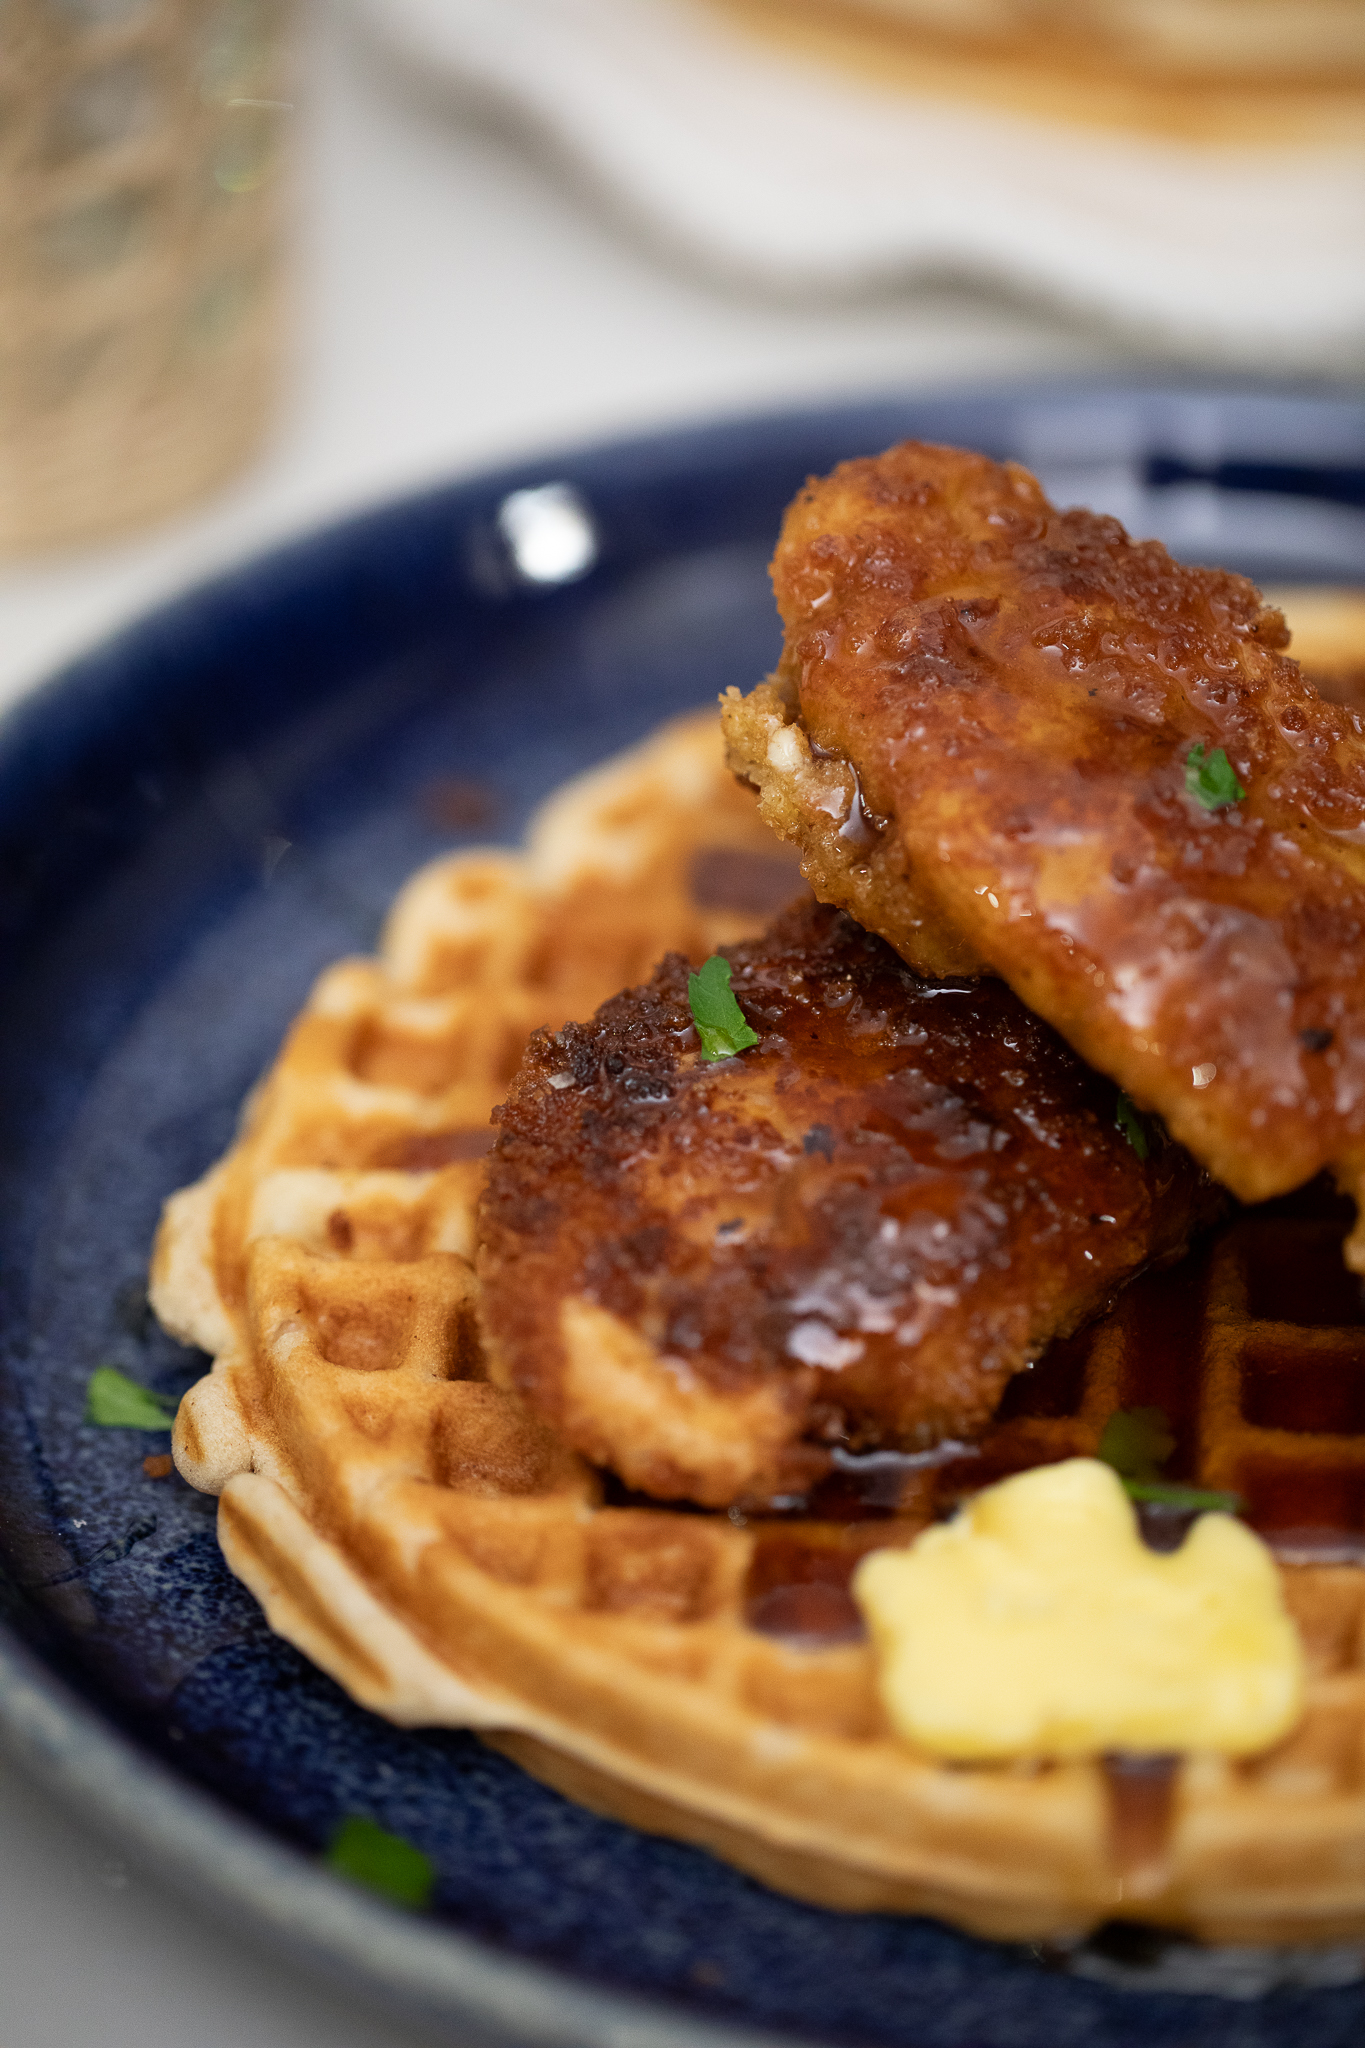 Southern Chicken and waffles with maple syrup